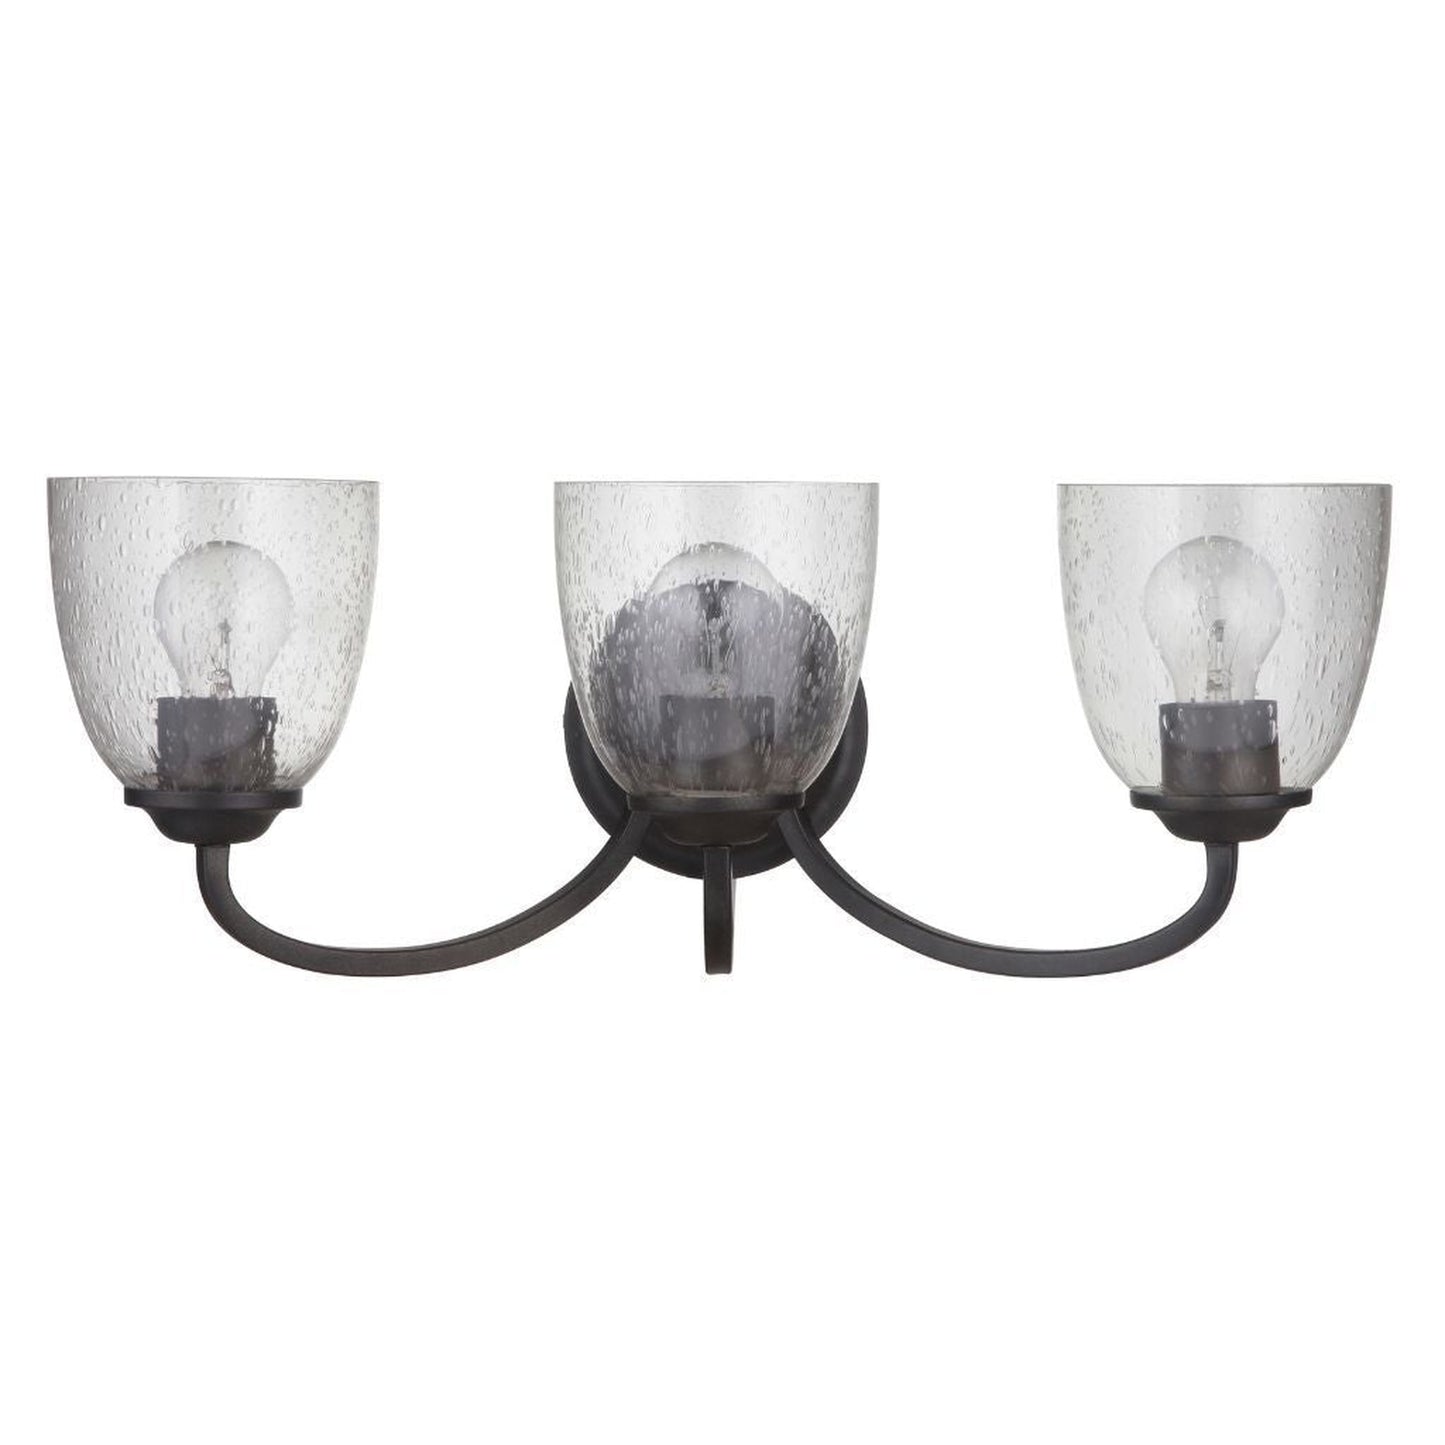 Craftmade Serene 23" 3-Light Espresso Vanity Light With Clear Seeded Glass Shades